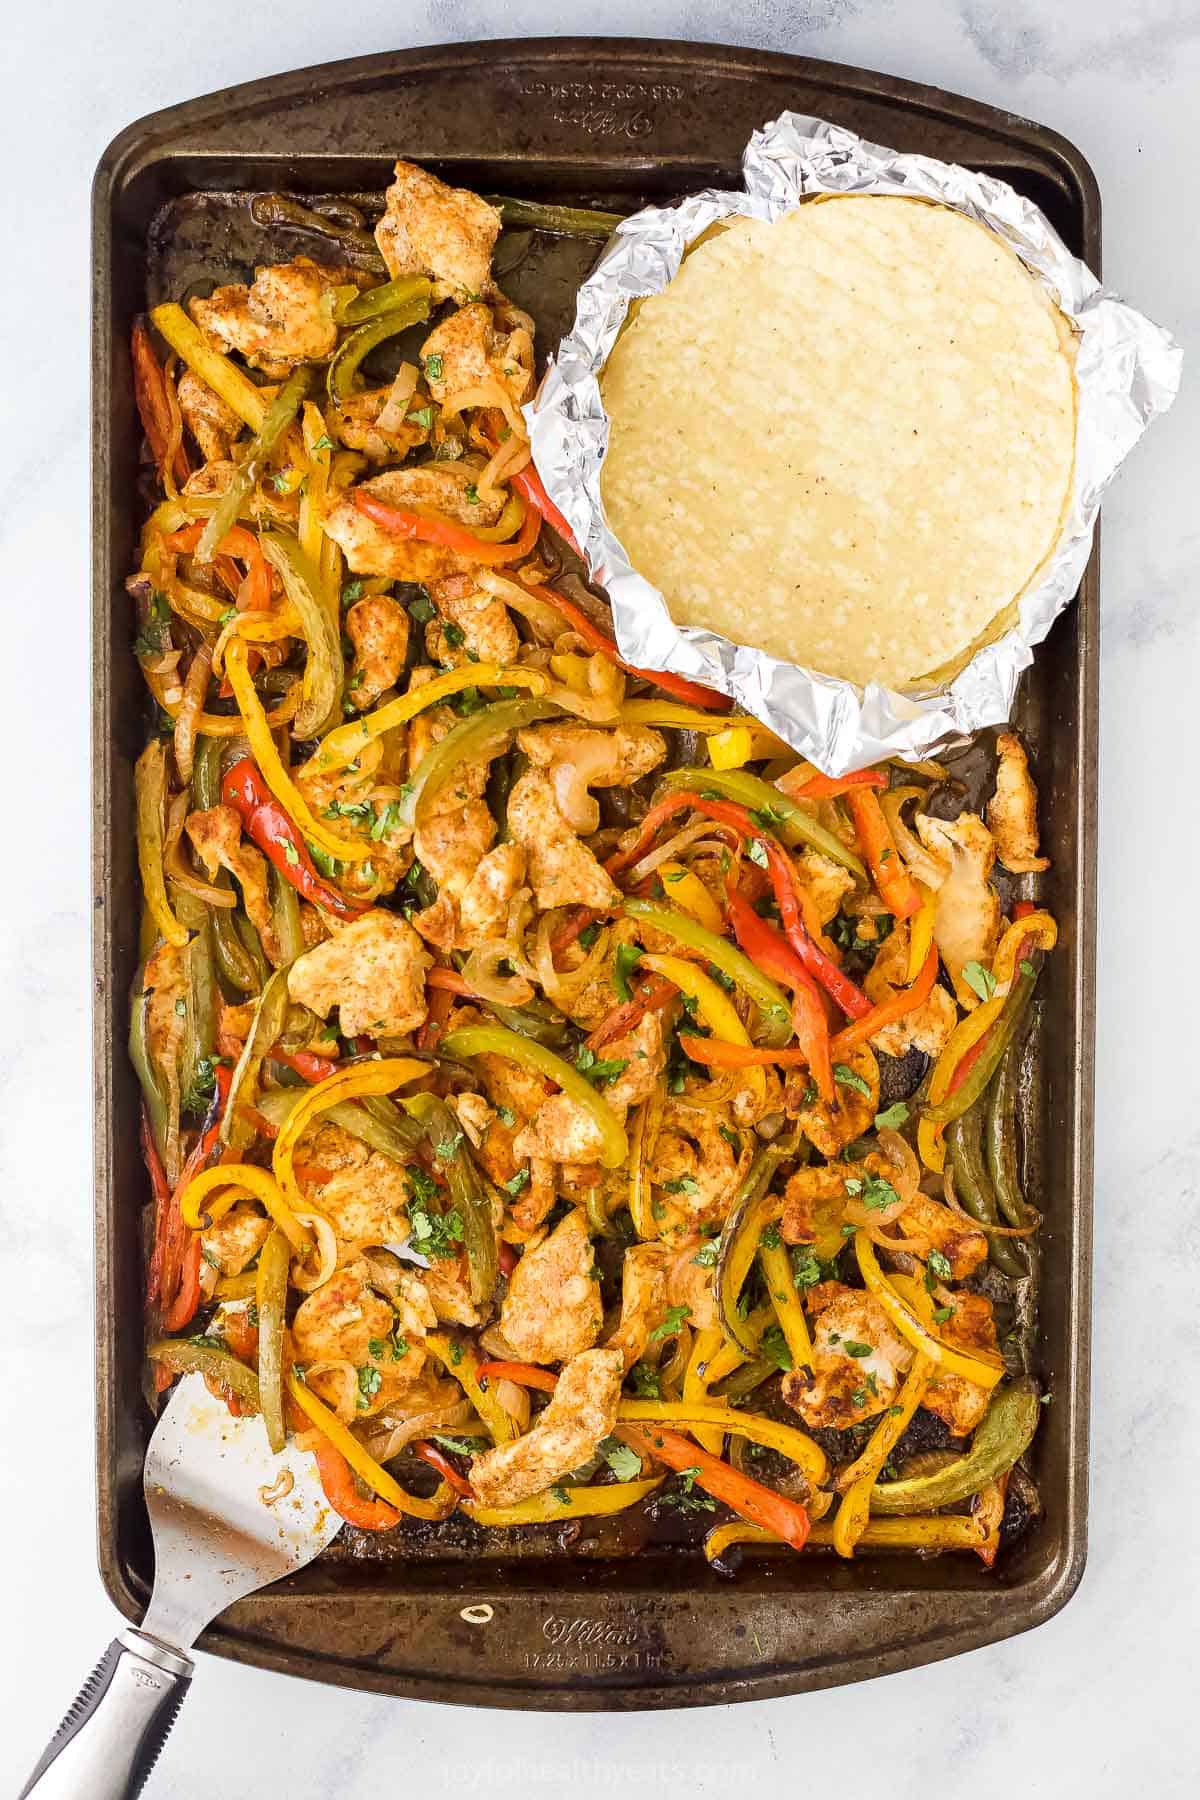 Overhead view of sheet pan chicken fajitas with tortillas on the side